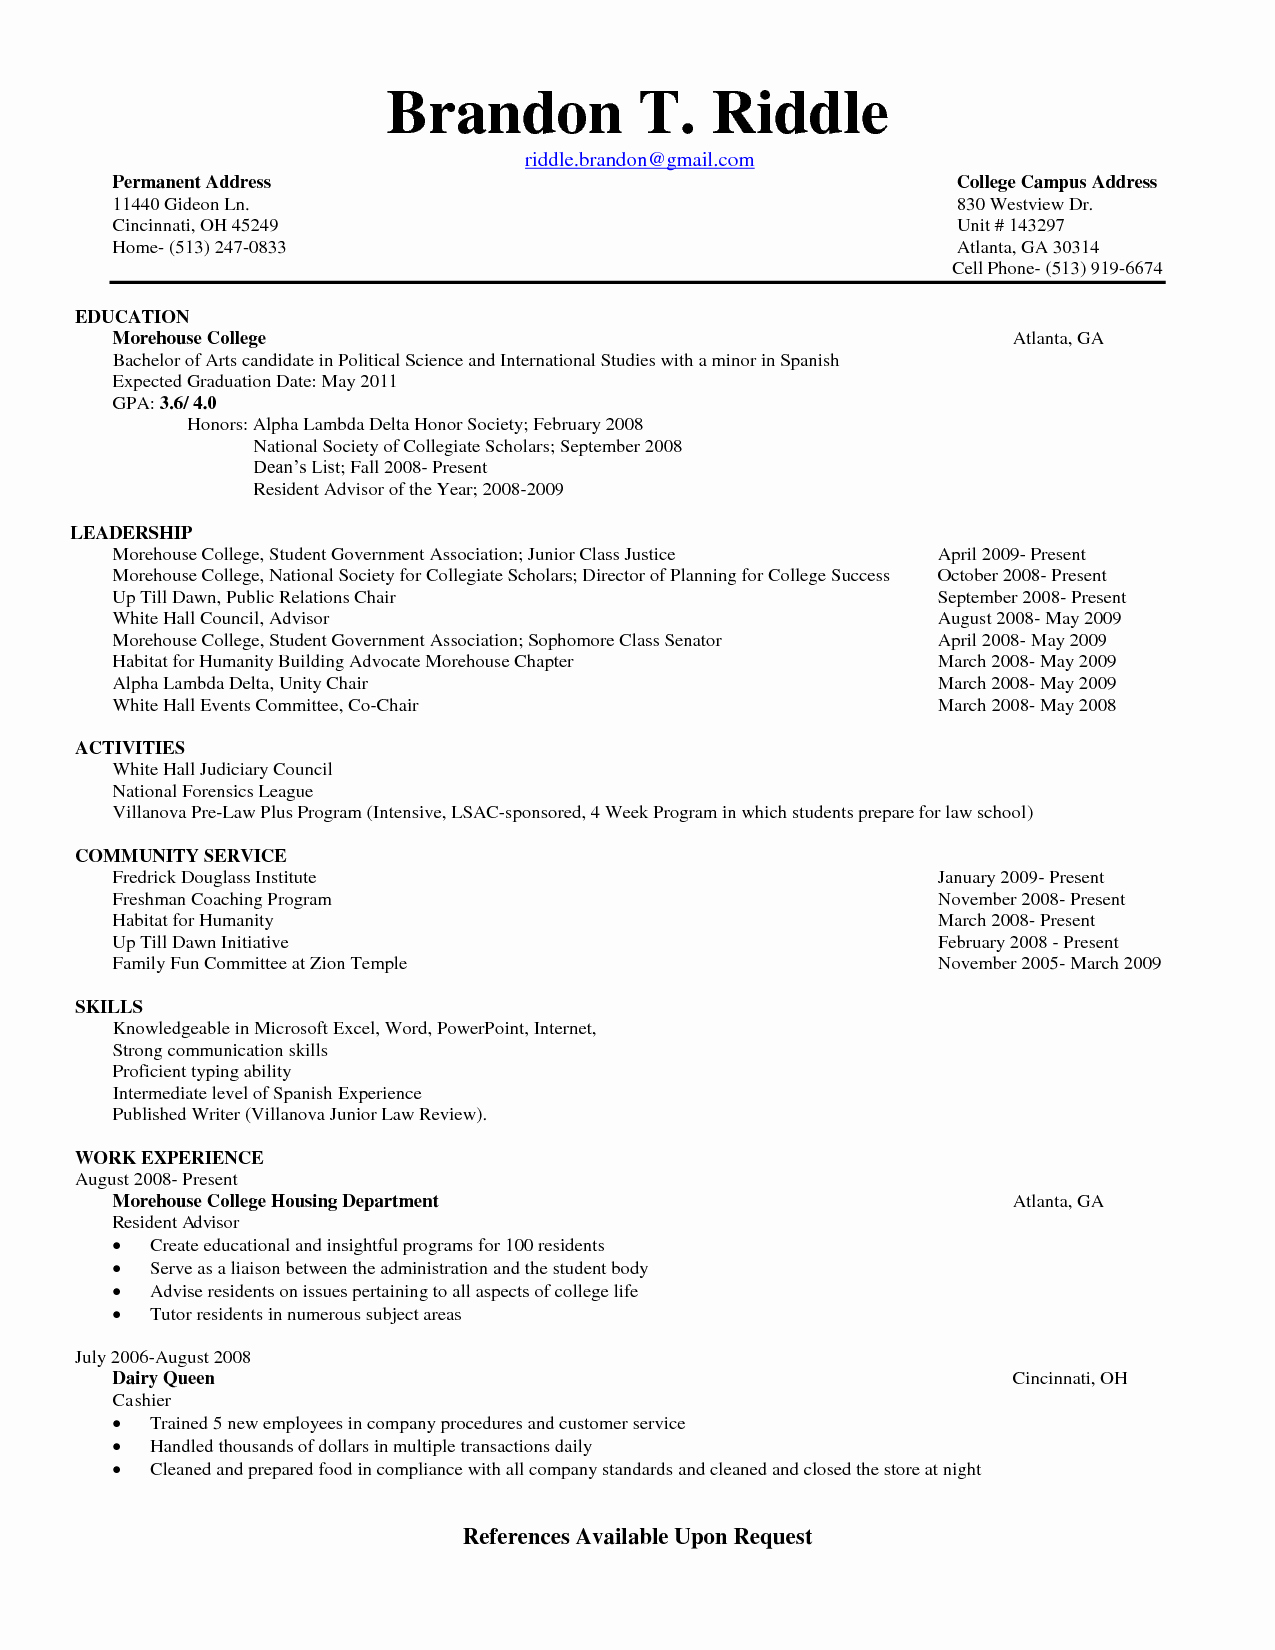 Resume Template College Student Fresh Structure Resume for A Student Resume Ideas